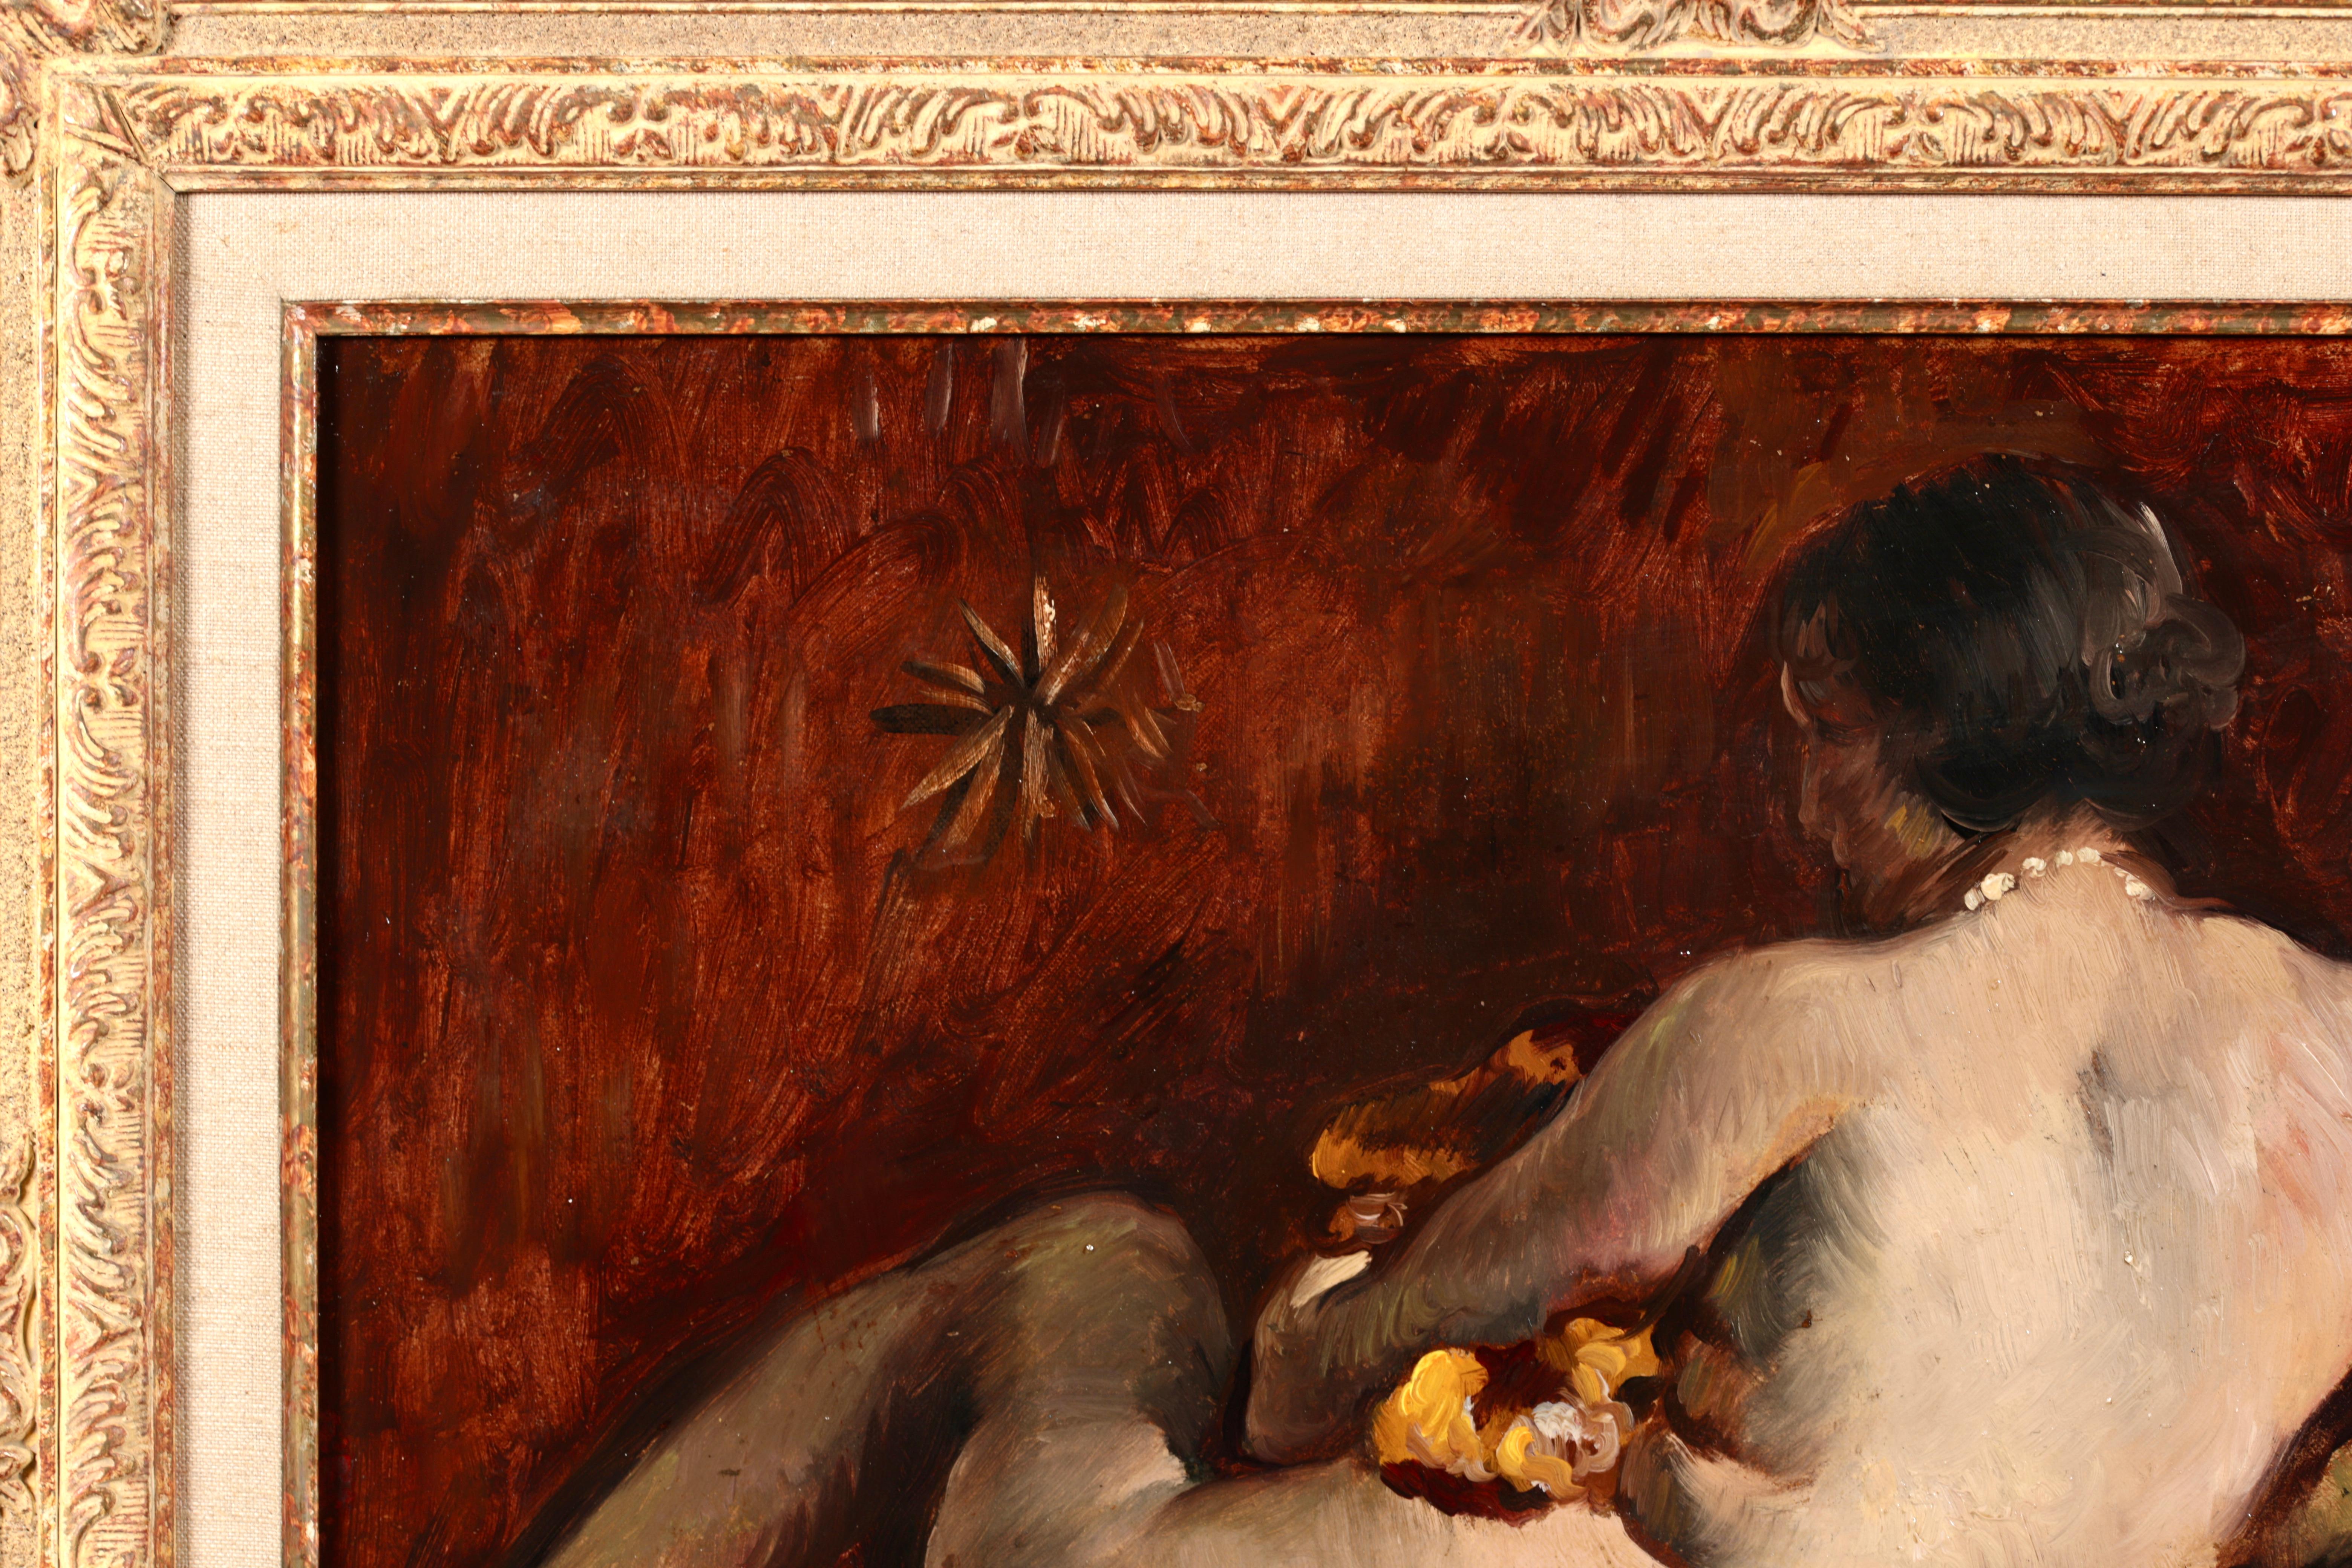 Signed and dated nude oil on panel by French post impressionist painter Paul Elie Gernez. The work depicts a brunette nude relaxing on a fur rug, her pale skin contrasting against the deep red of the wall behind her.

Signature:
Signed and dated